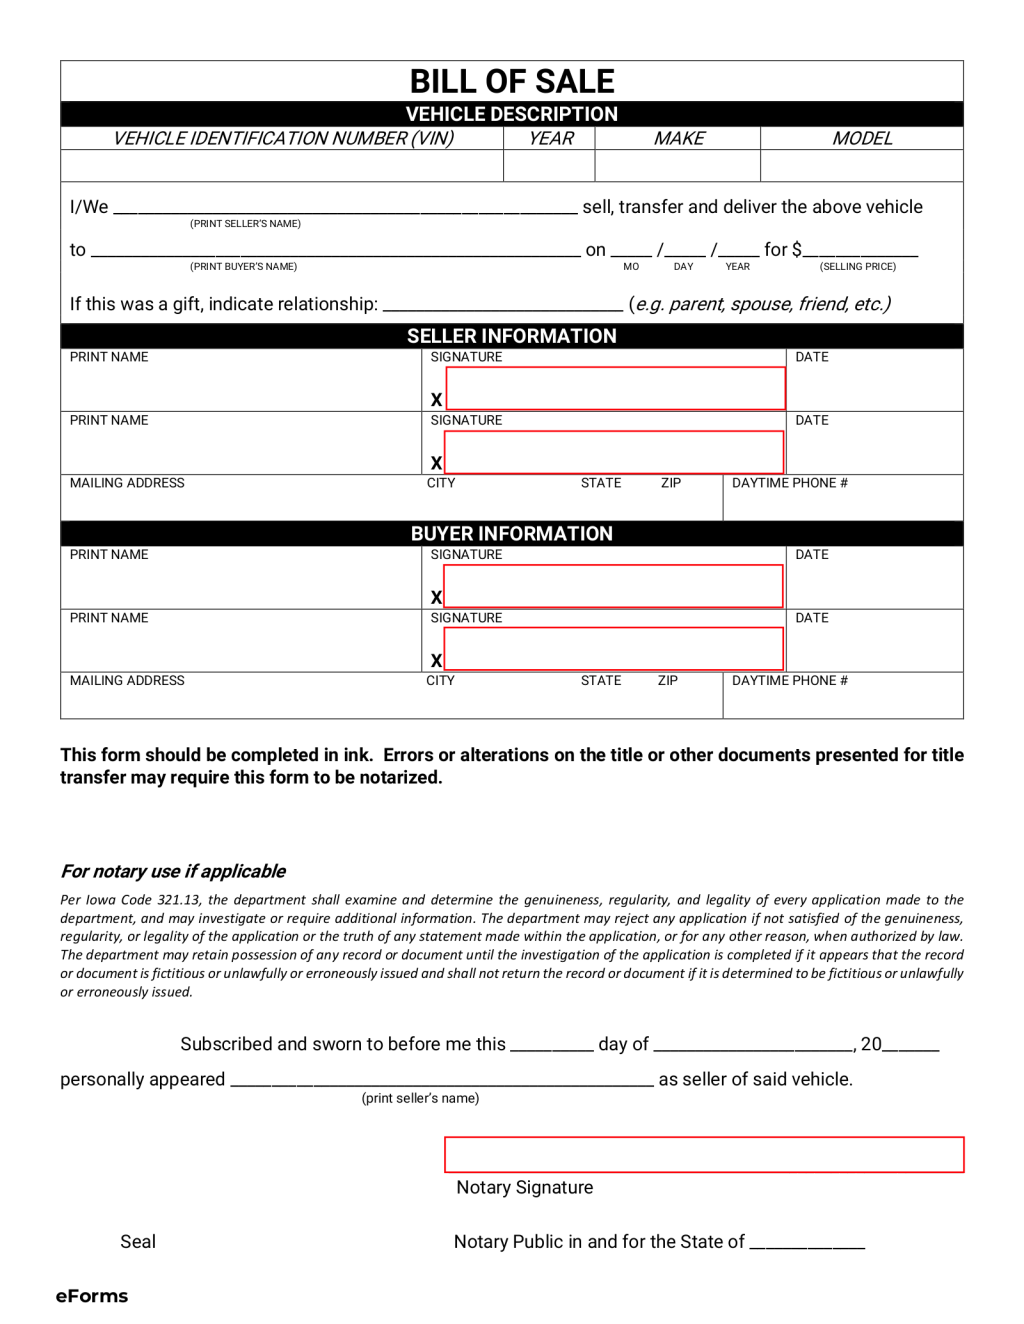 Picture of: Free Iowa Motor Vehicle Bill of Sale Form – PDF – eForms